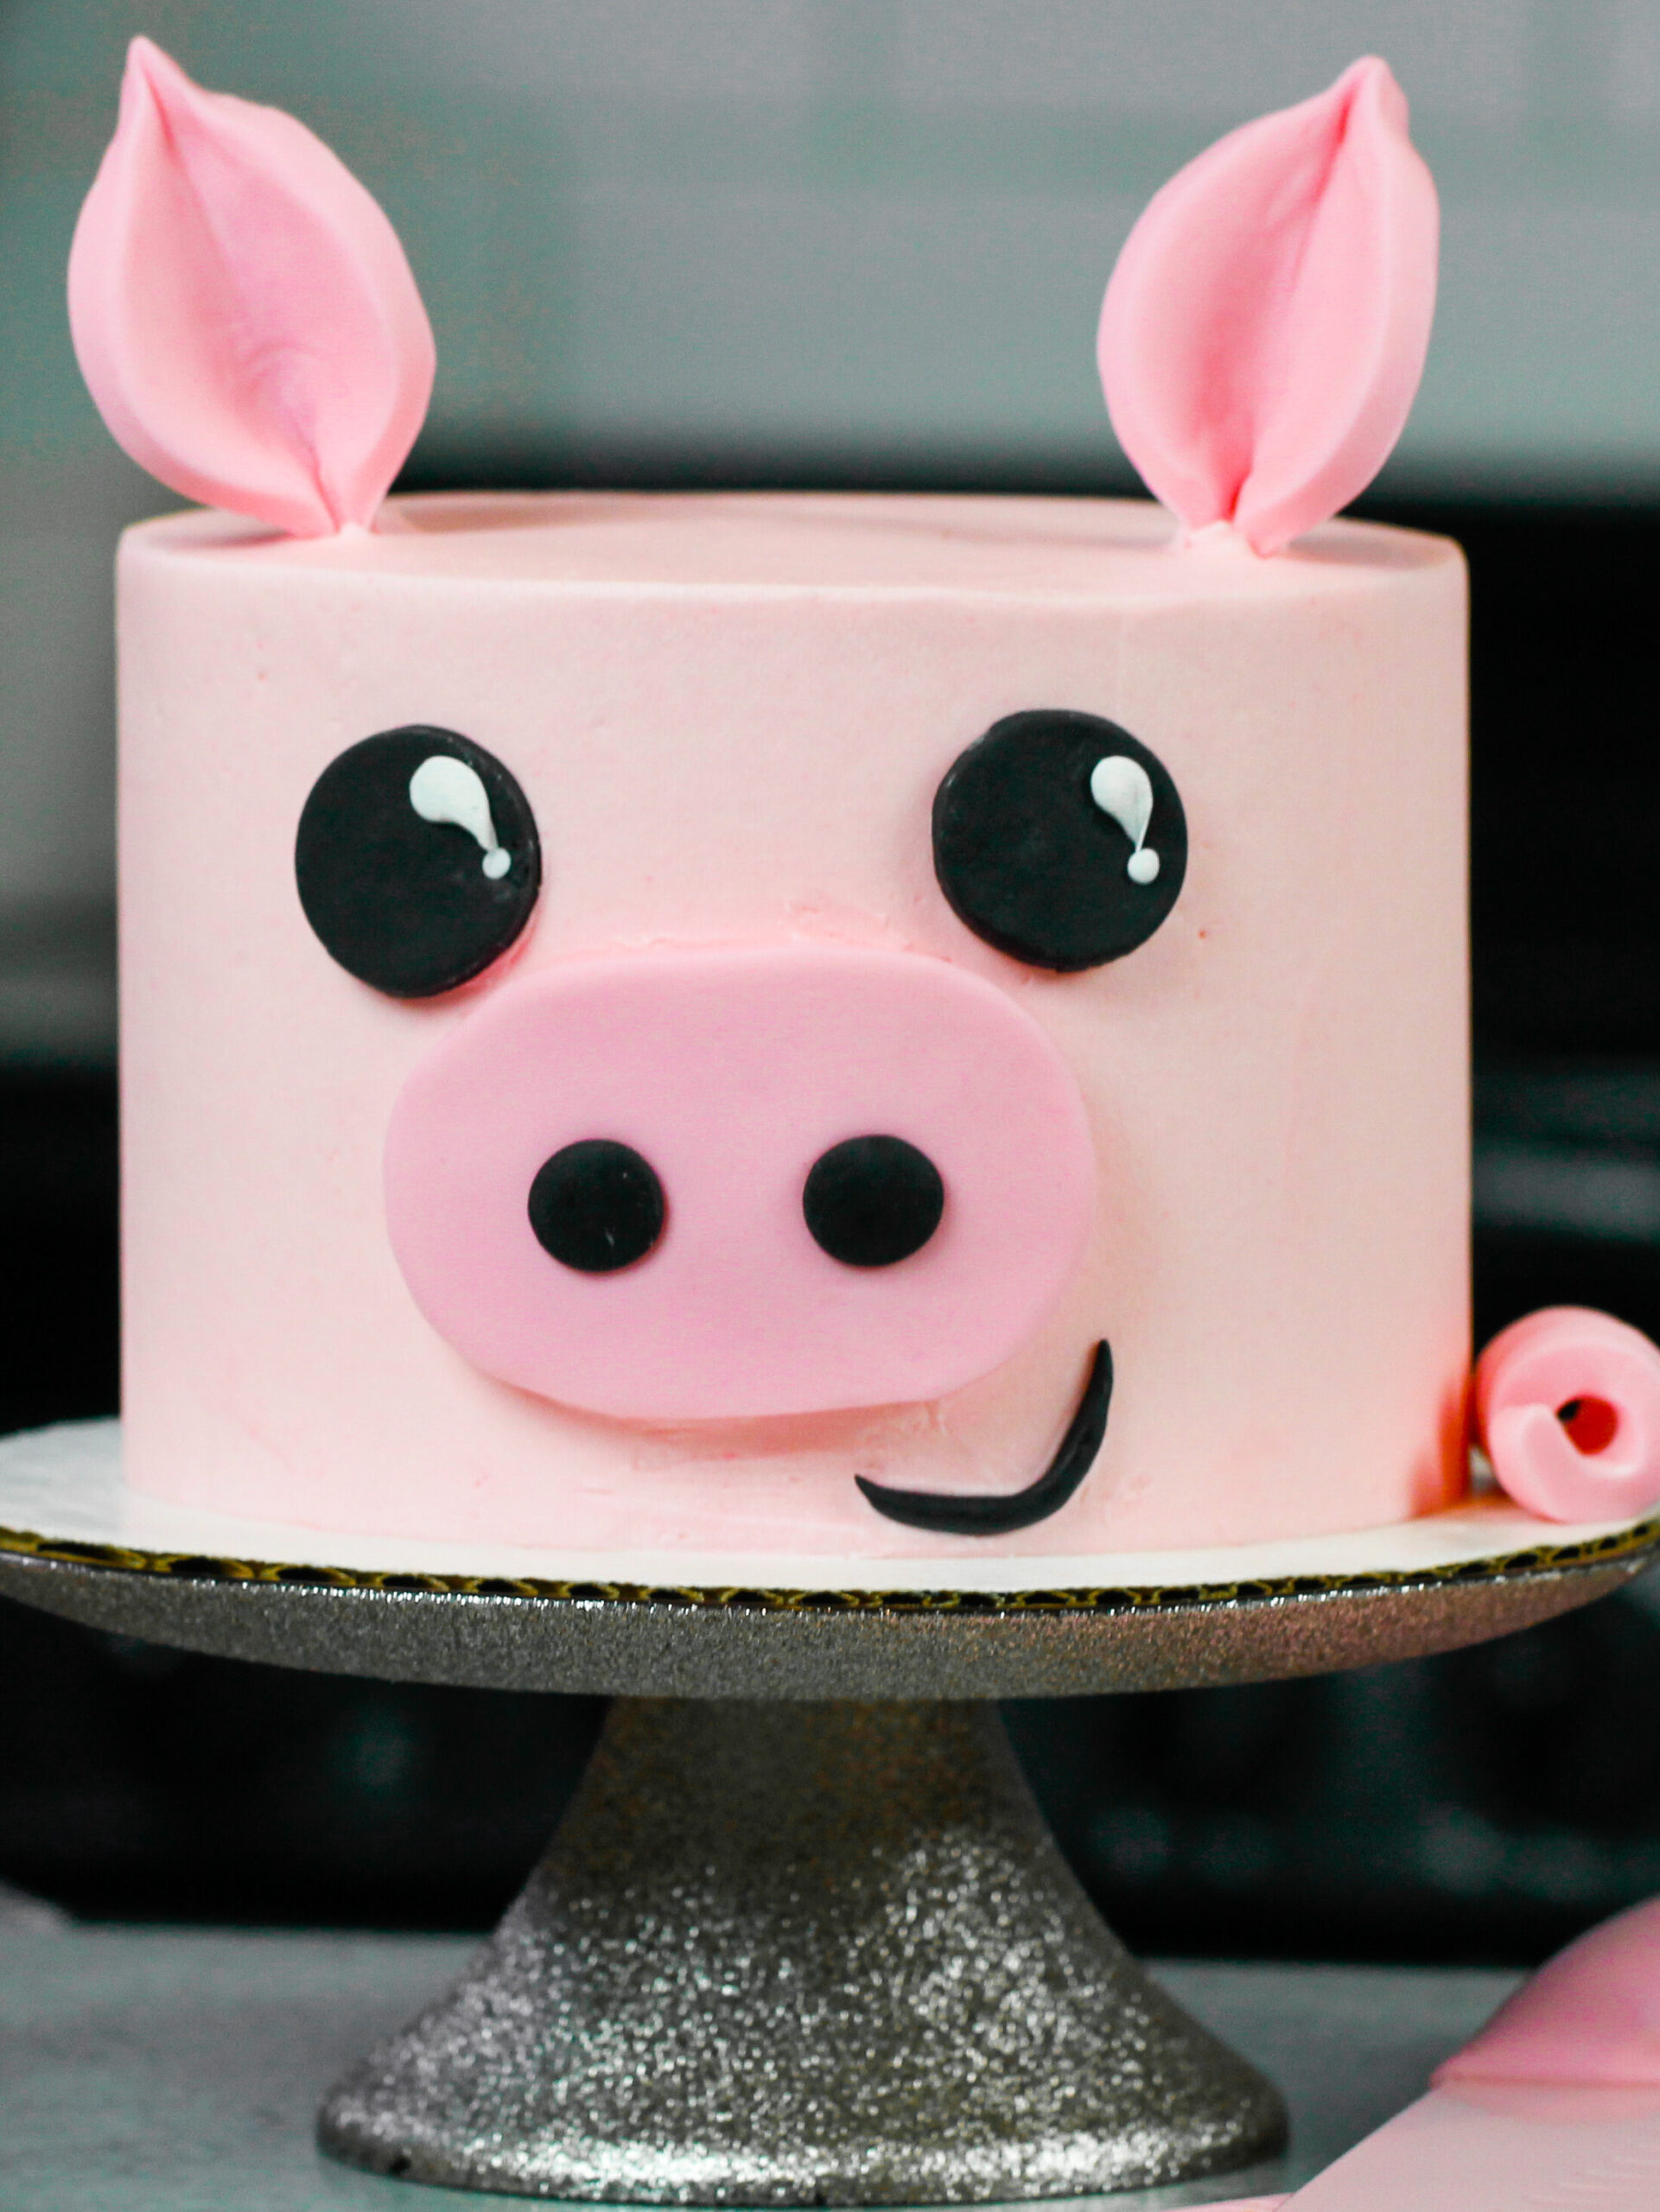 image of a pig cake made with buttercream